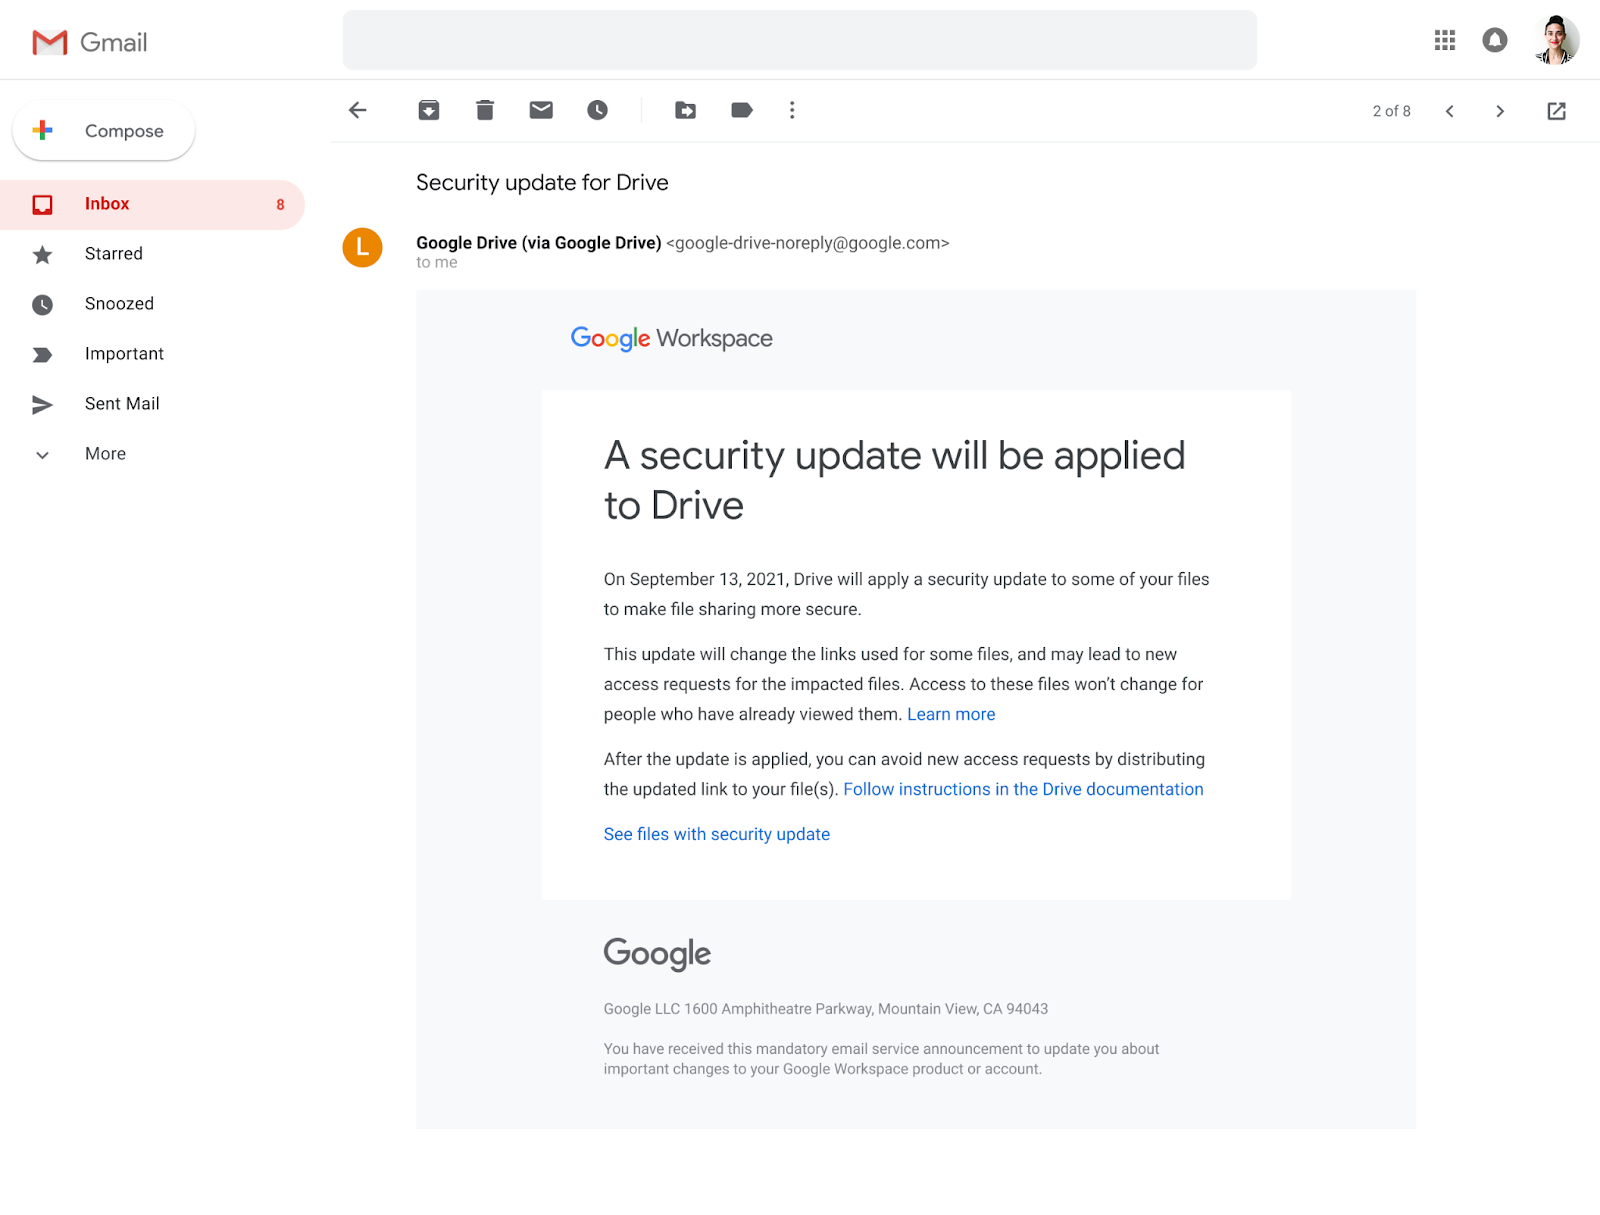 Message from Google about Drive security update